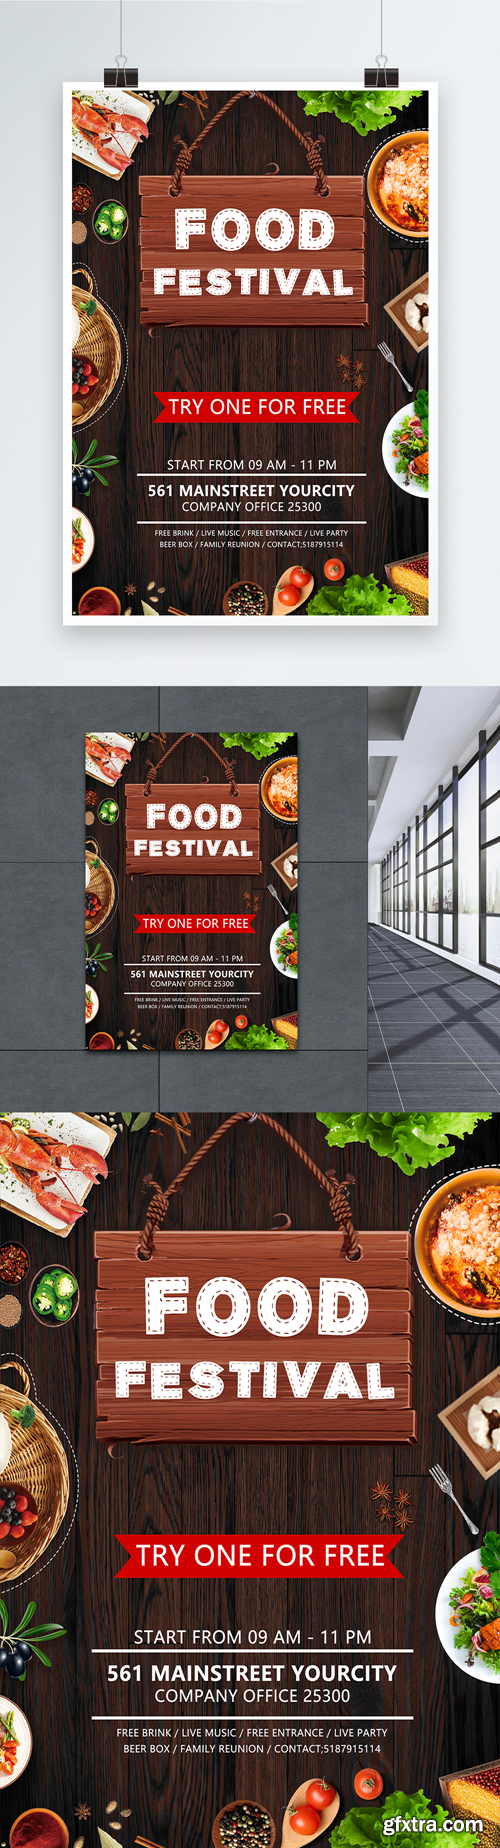 food festival poster » GFxtra